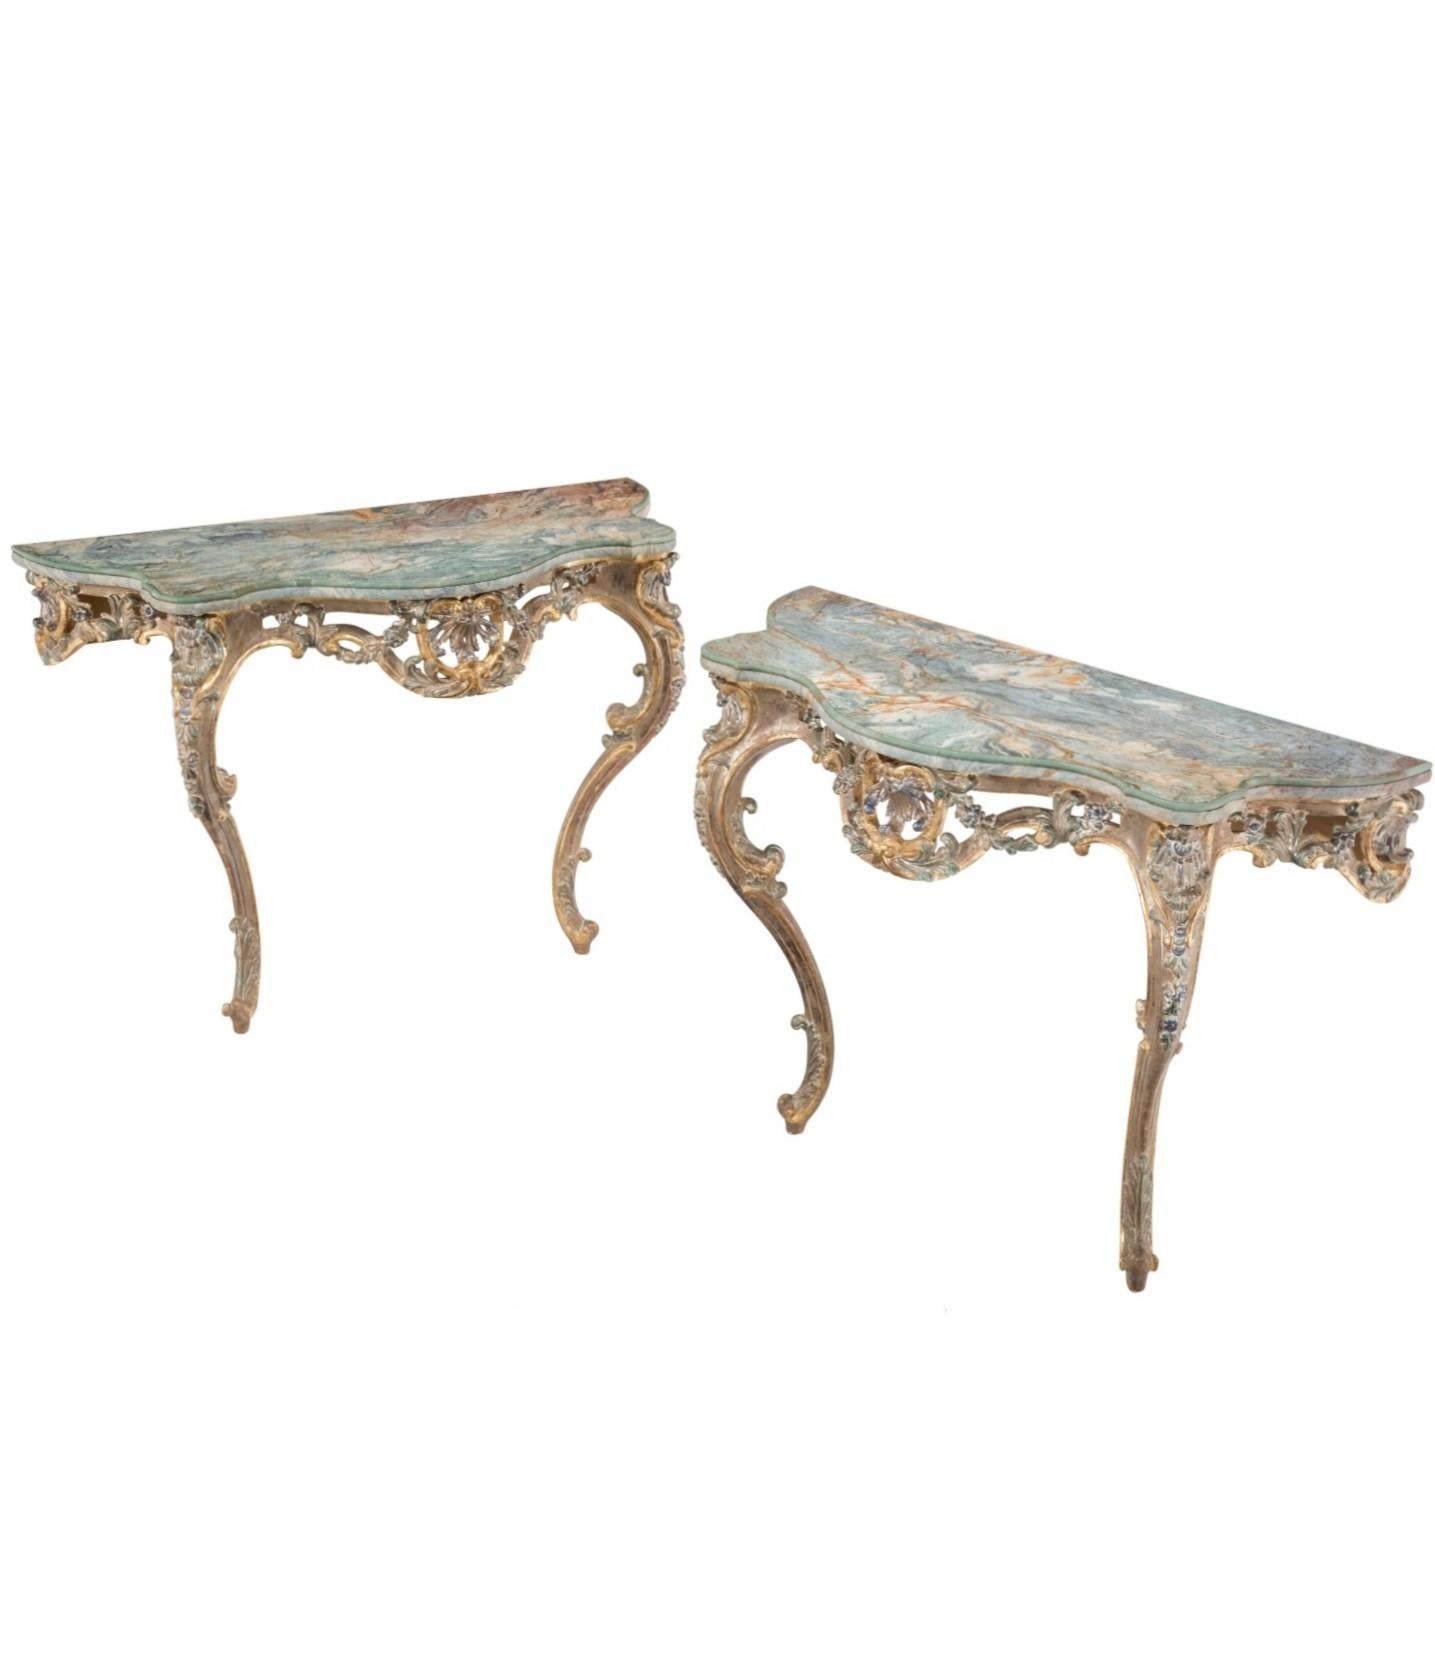 Hand-Carved Pair of Italian Late Baroque Rococo Style Carved Polychrome Gilt Wood Consoles